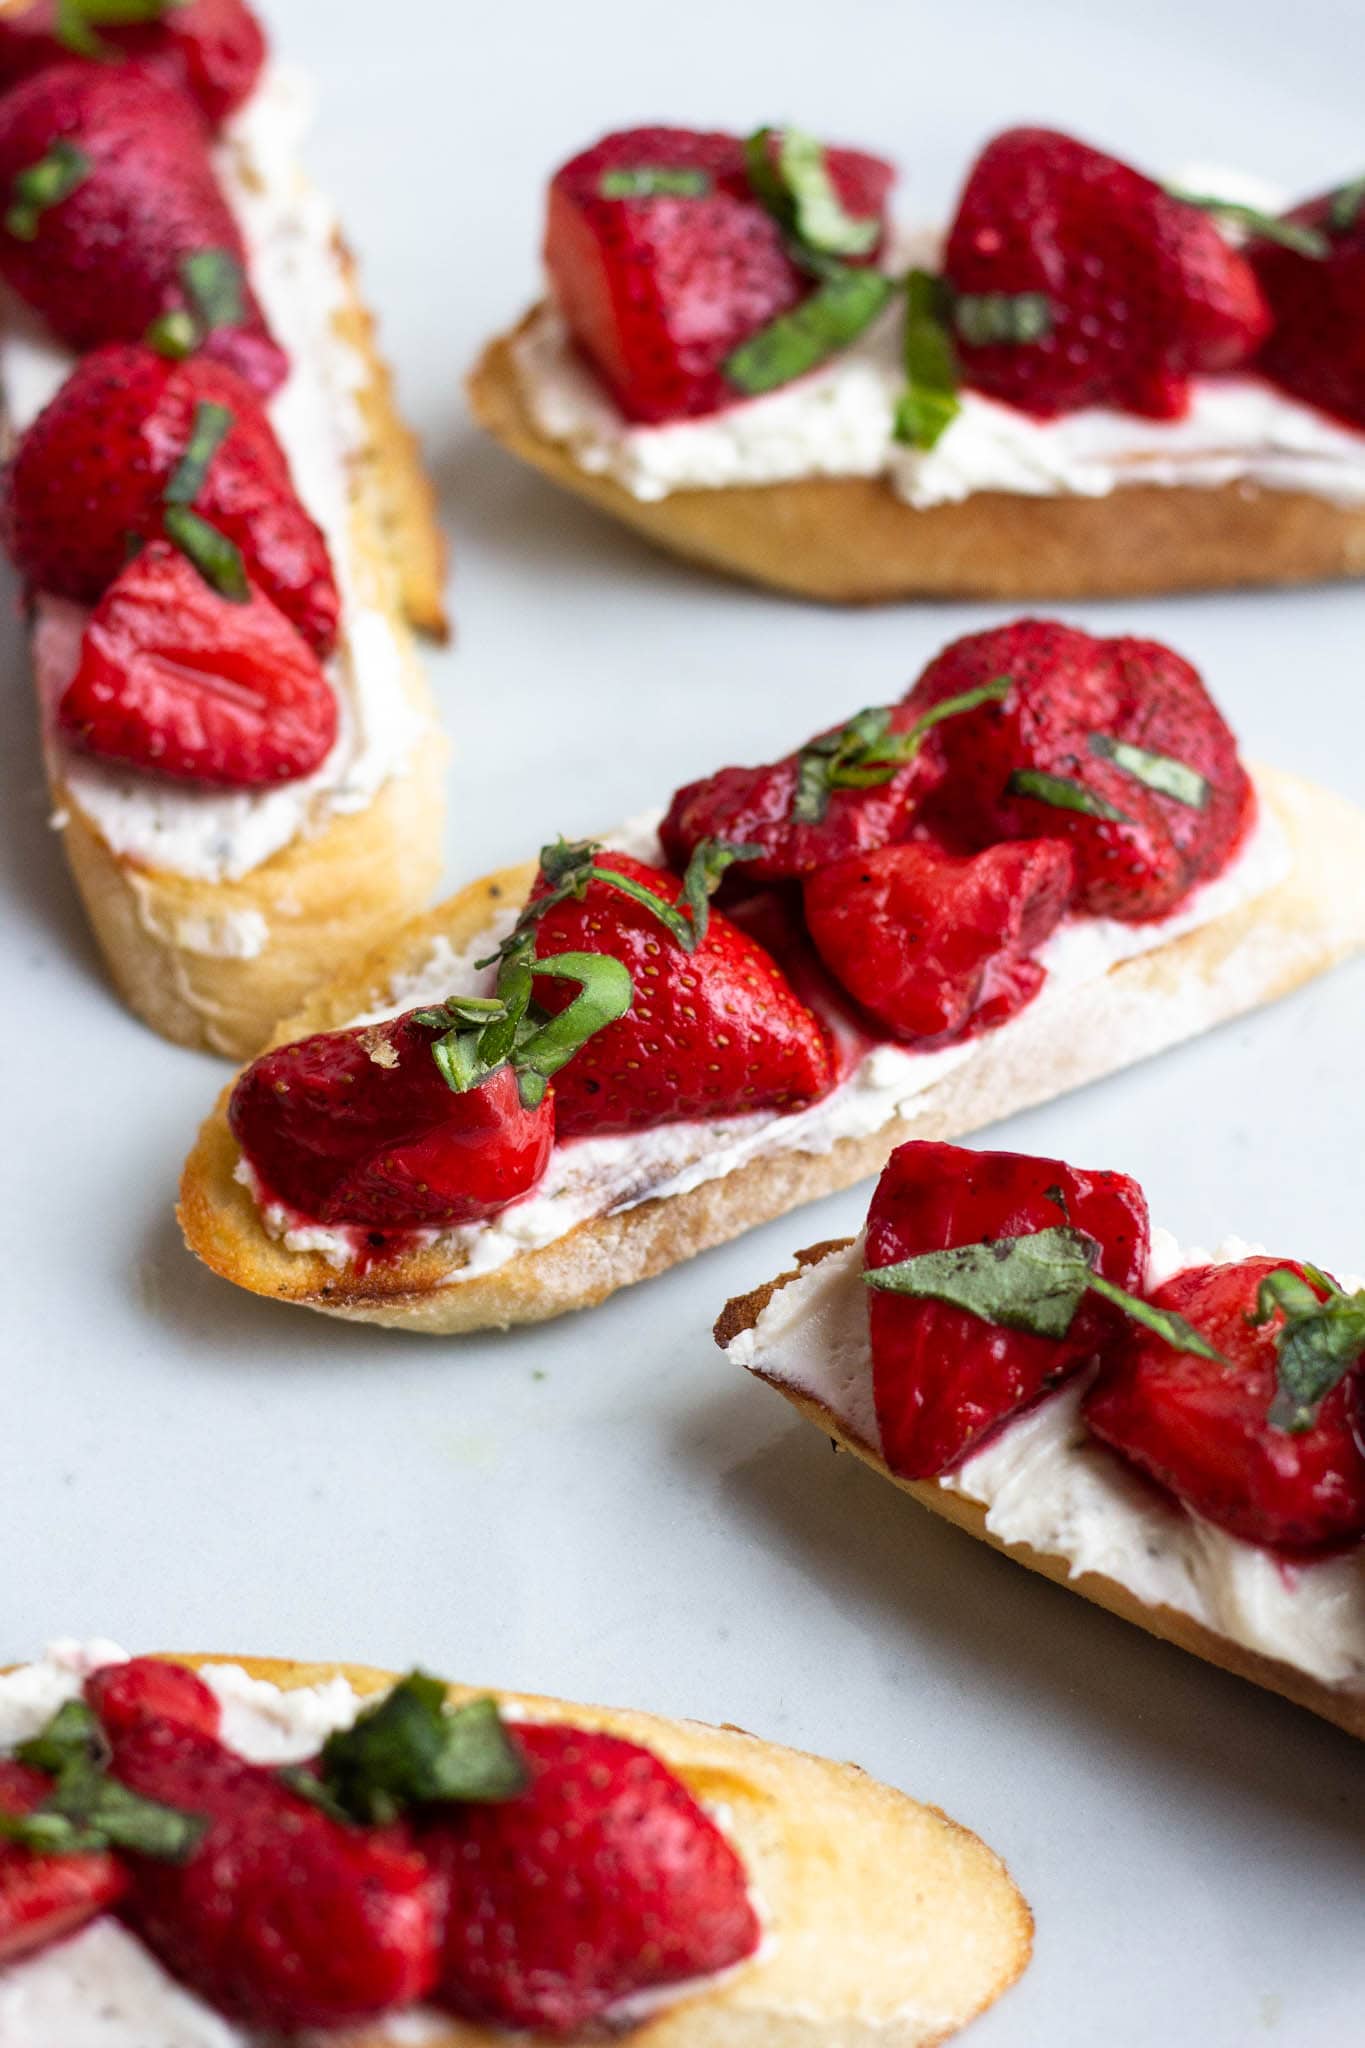 A plate filled with strawberry and rondelé crostini